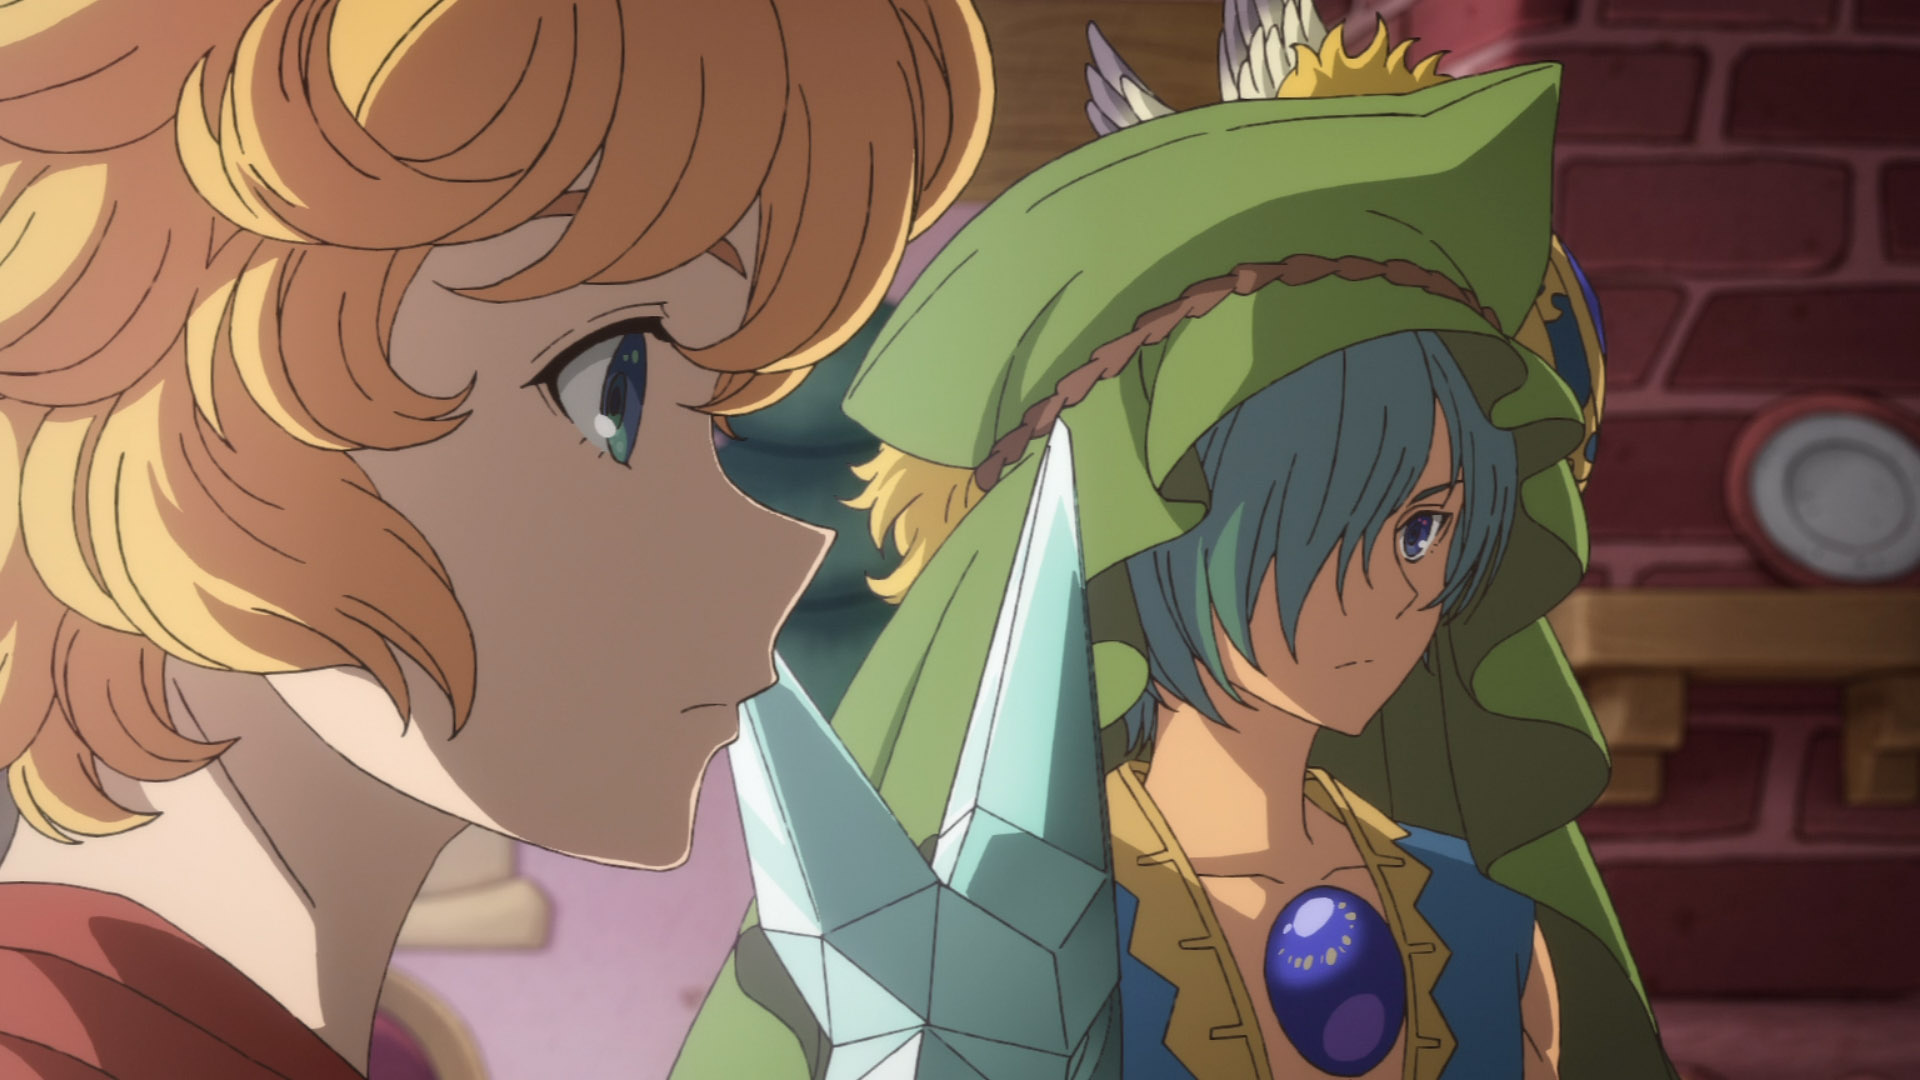 Behold! A New Anime Intro for Legend of Mana | RPGFan